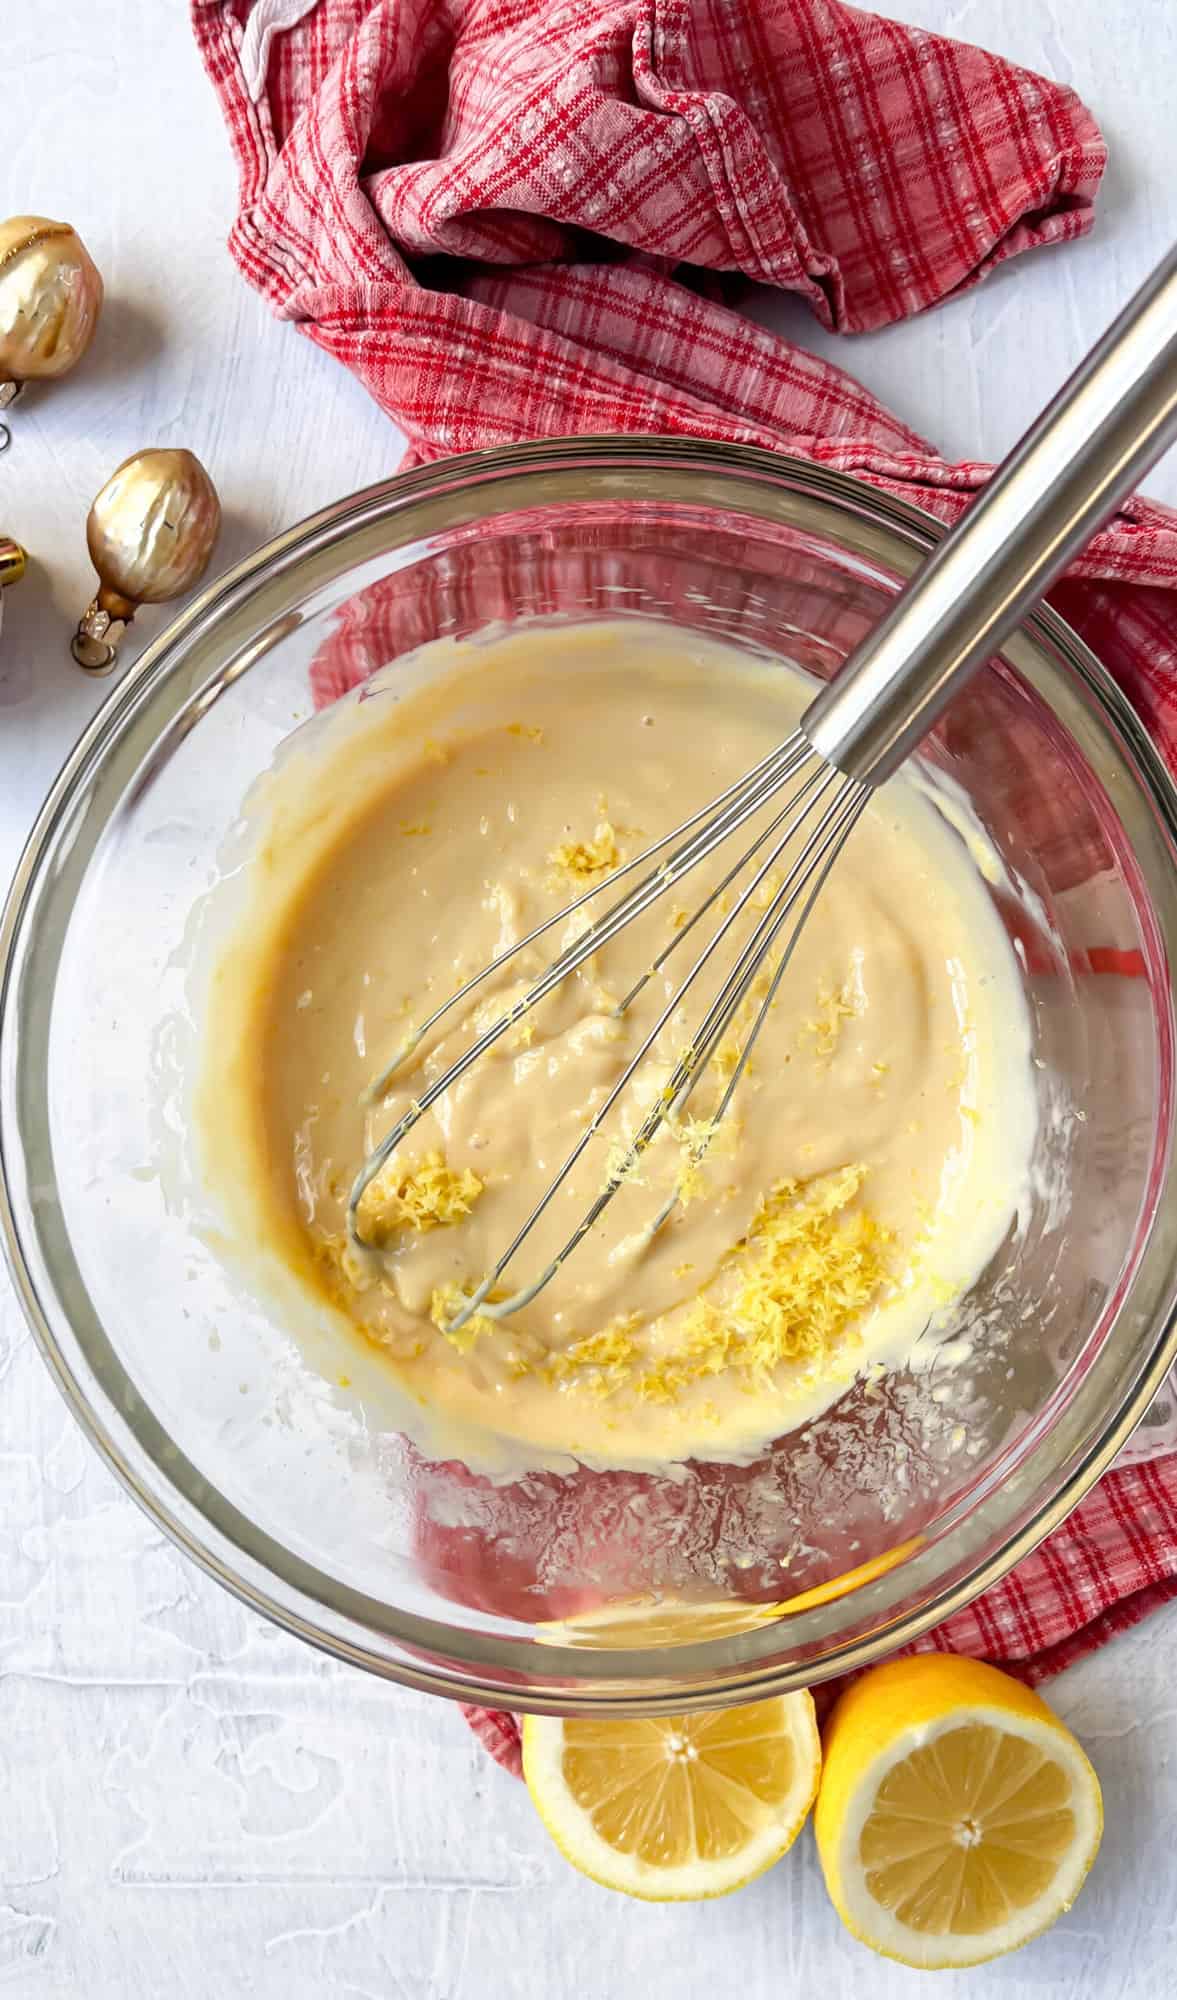 Creamy mixture in mixing bowl with whisk and lemon zest.